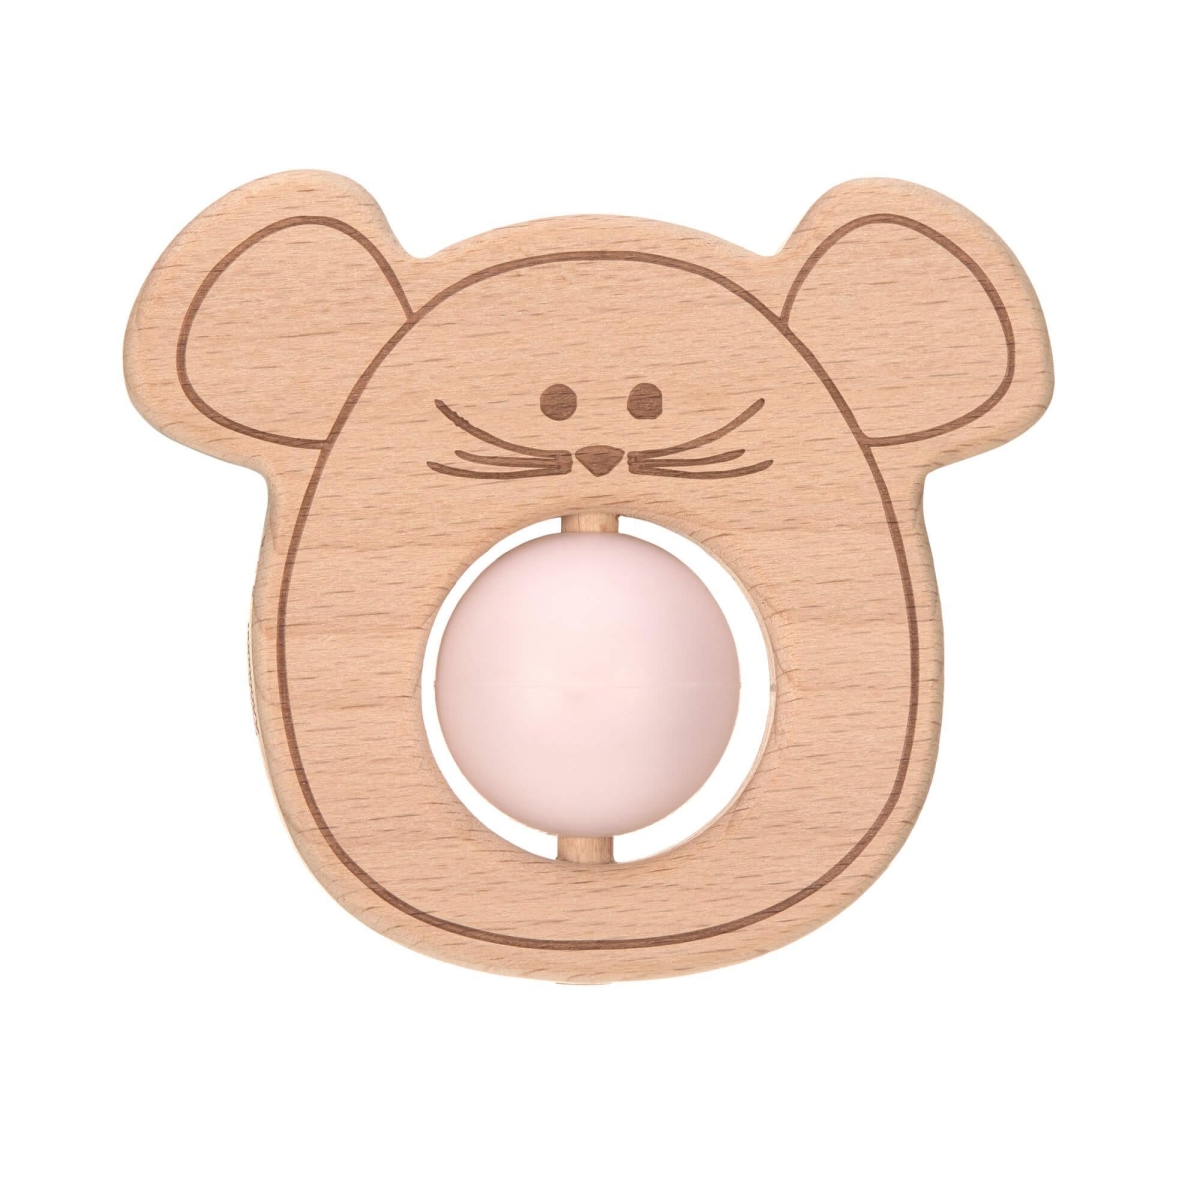 Teether "Ball" Wood/Silicone Little Chums Mouse